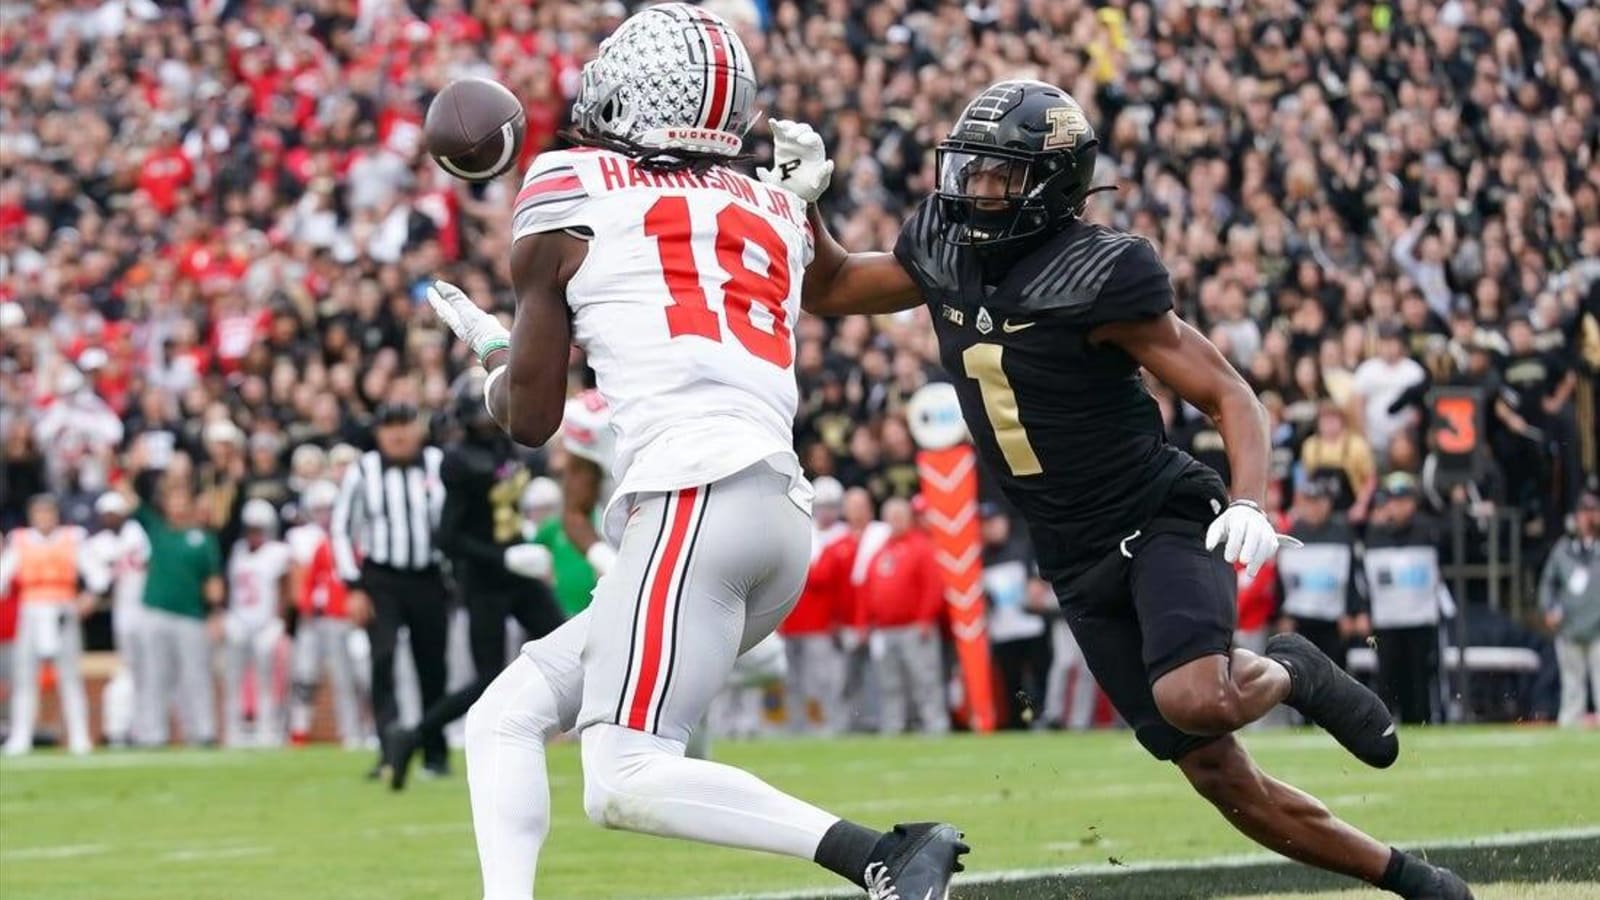 No. 3 Ohio State easily takes care of Purdue